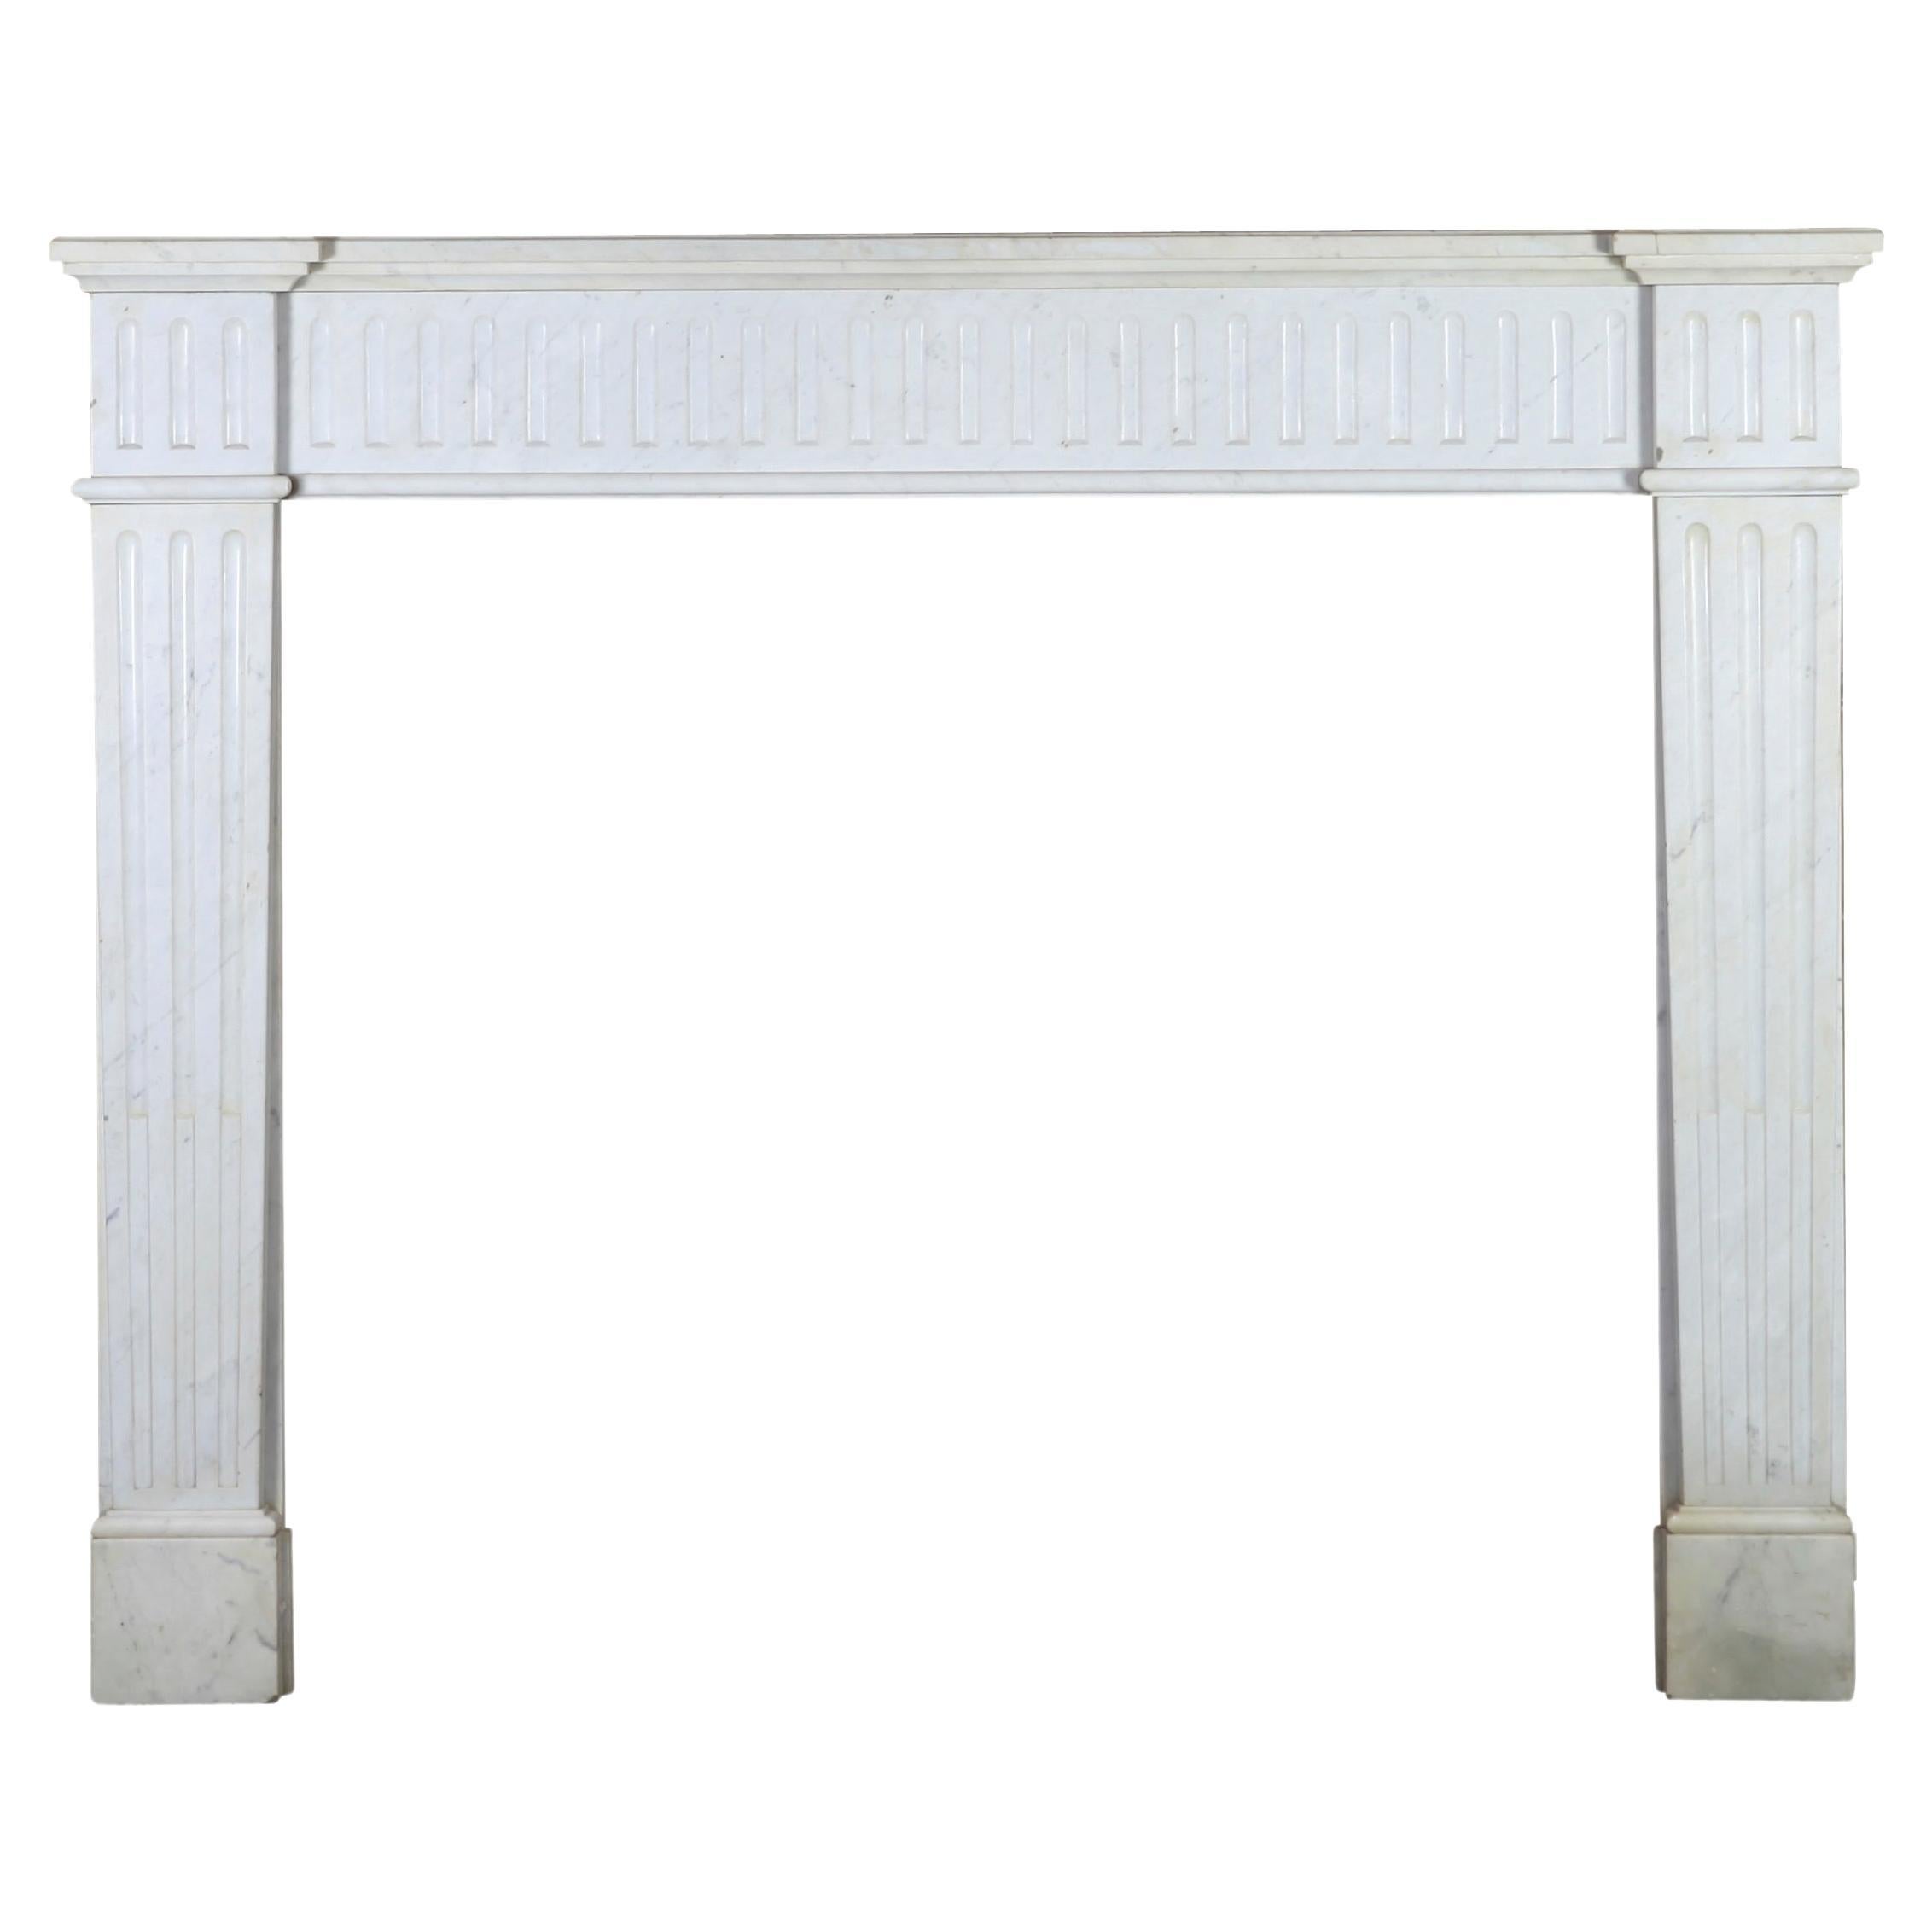 Original simple vintage fireplace surround from a Belgium home in white Carrara marble. It is a Louis XVI style from the 19th century. 
Measures:
135 cm Exterior Width 53,15 Inch
108 cm Exterior Hight 42,52 Inch
102 cm Interior Width 40,15 Inch
88